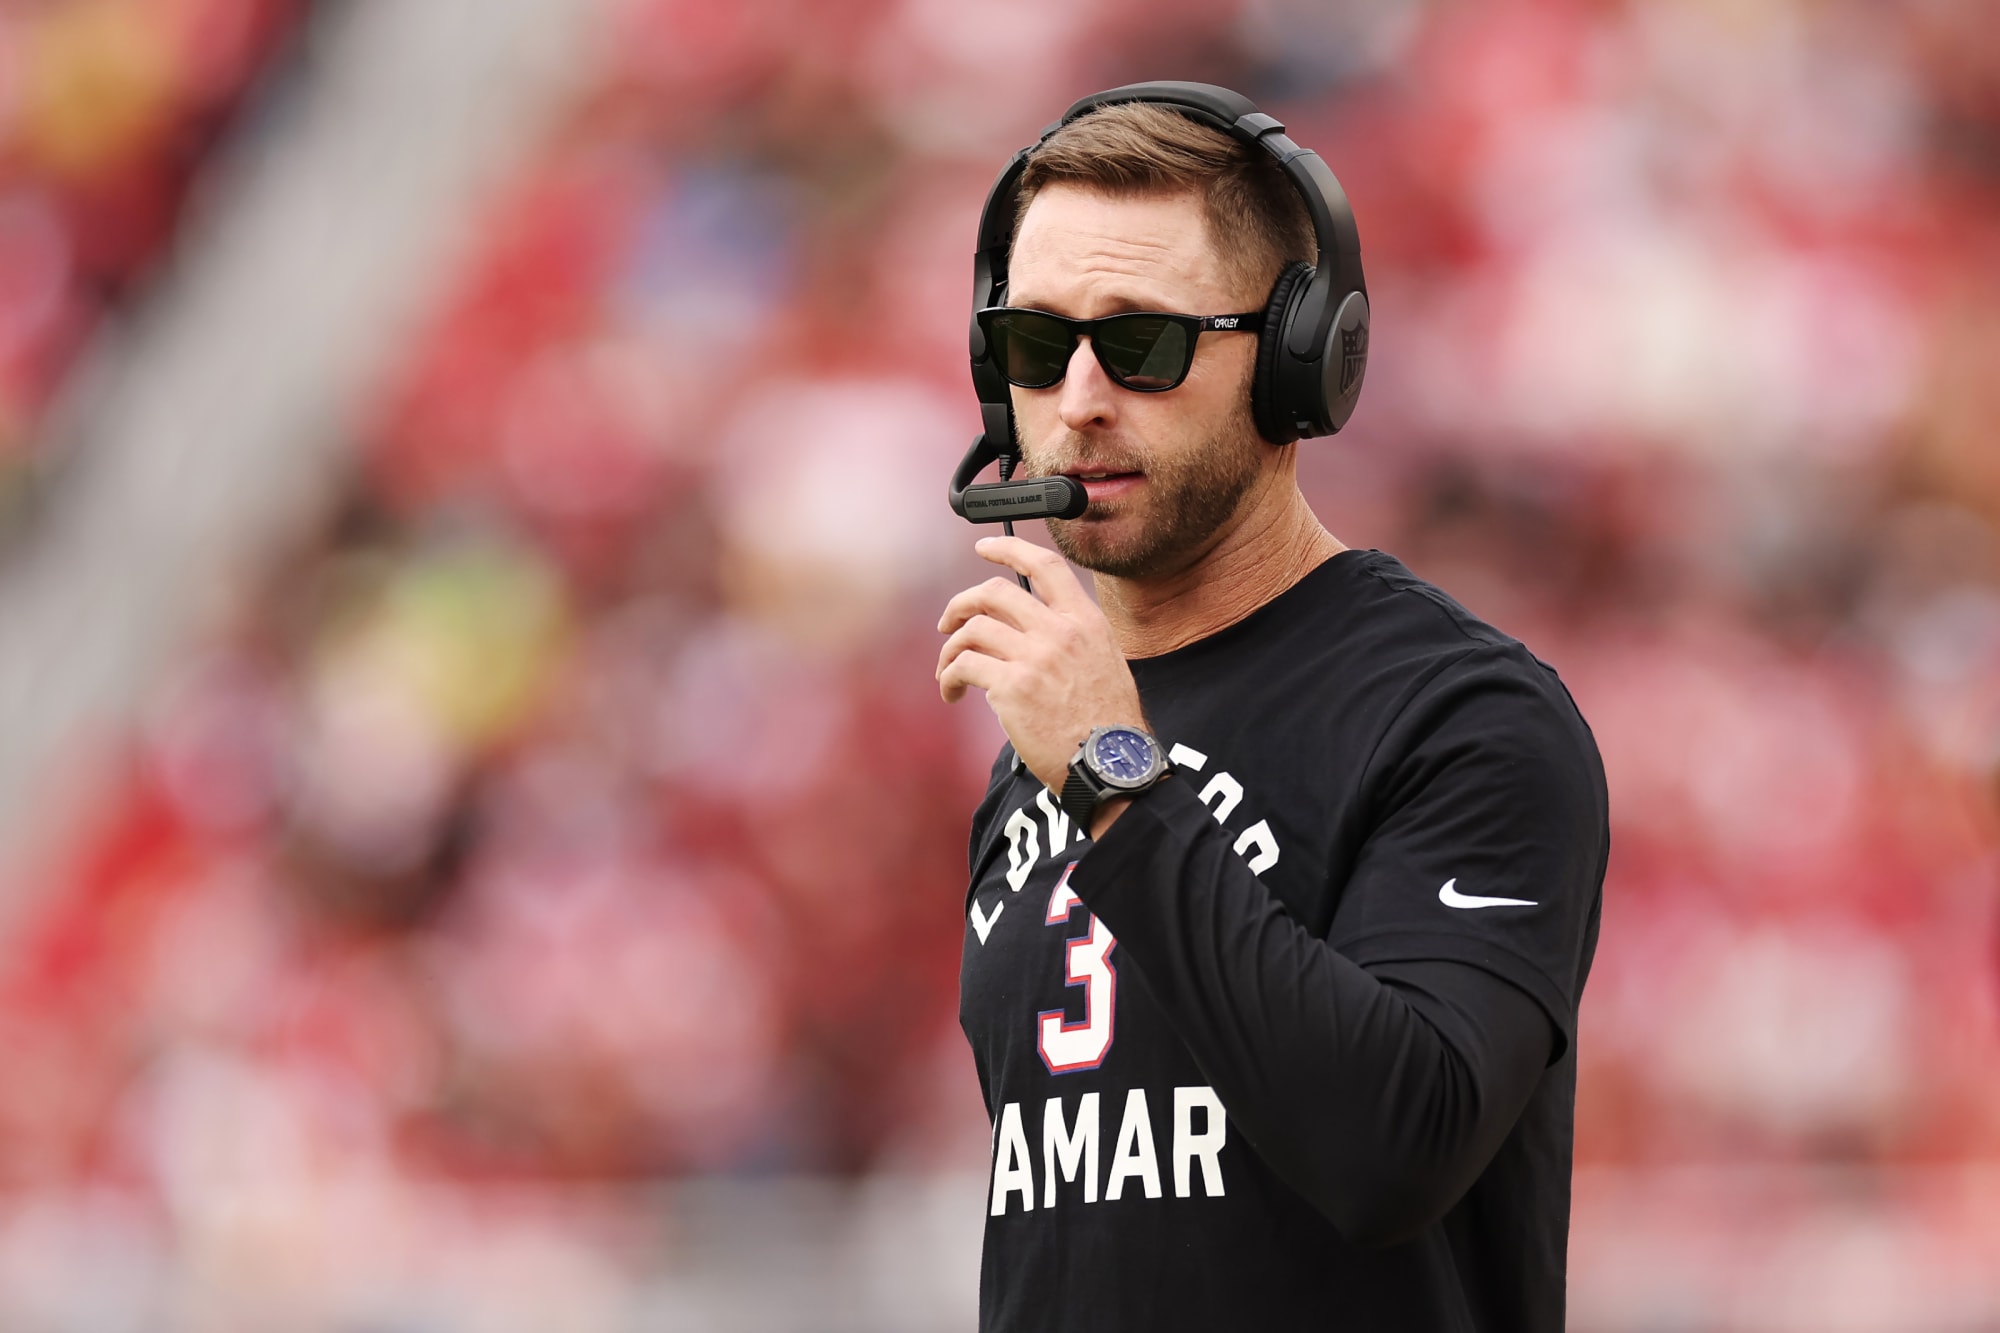 Kliff Kingsbury should have stayed in college, even though he wasn’t good